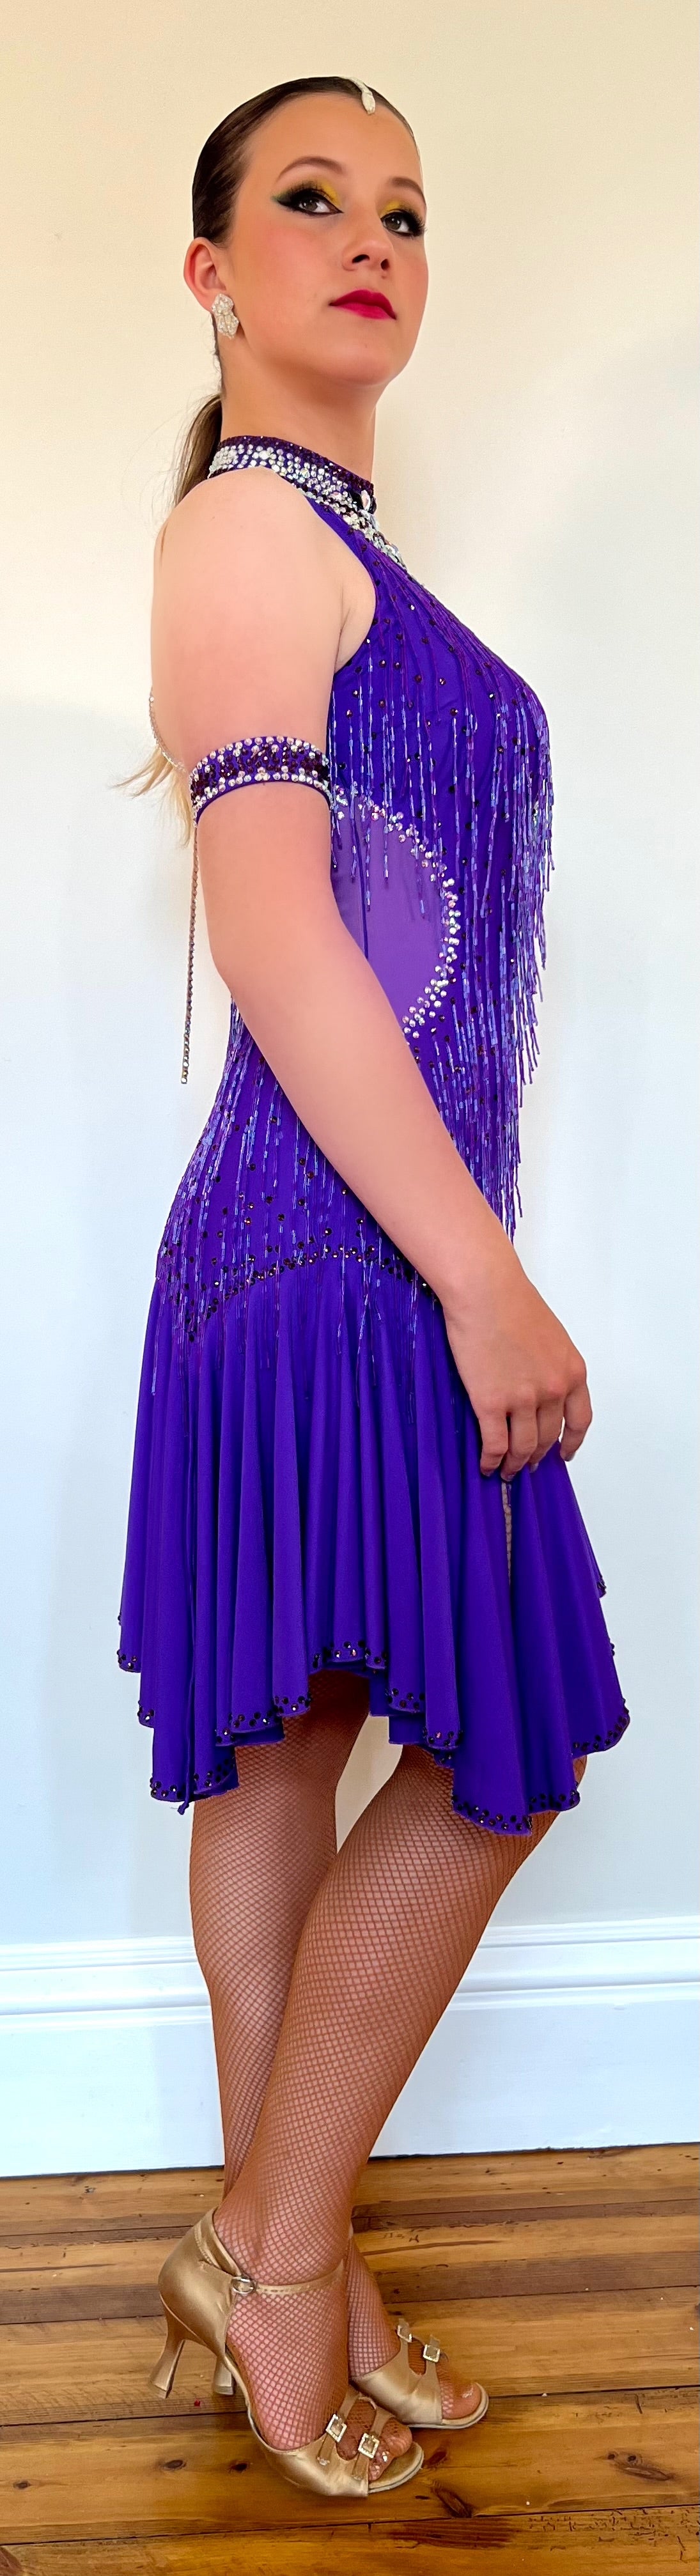 249 Purple High neck Latin dress. Detailed strapping to the back with high halter neck detail to the front. Full frill skirt giving maximum movement. Decorated in purple & AB stones